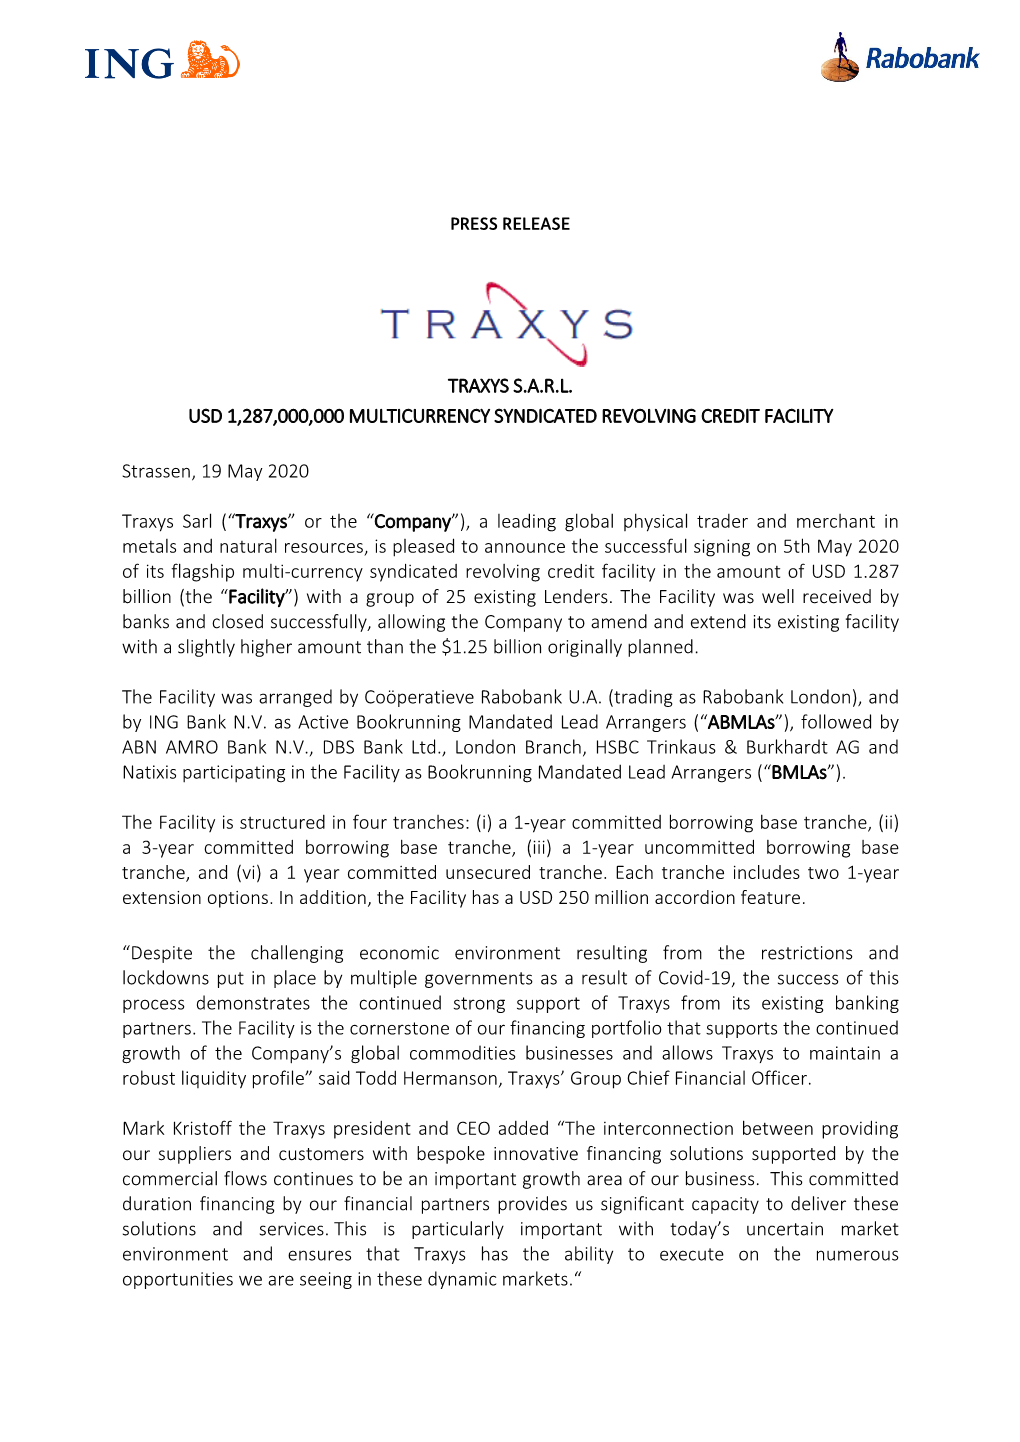 2020-05-19 Traxys S.A.R.L. Usd 1287000000 Multicurrency